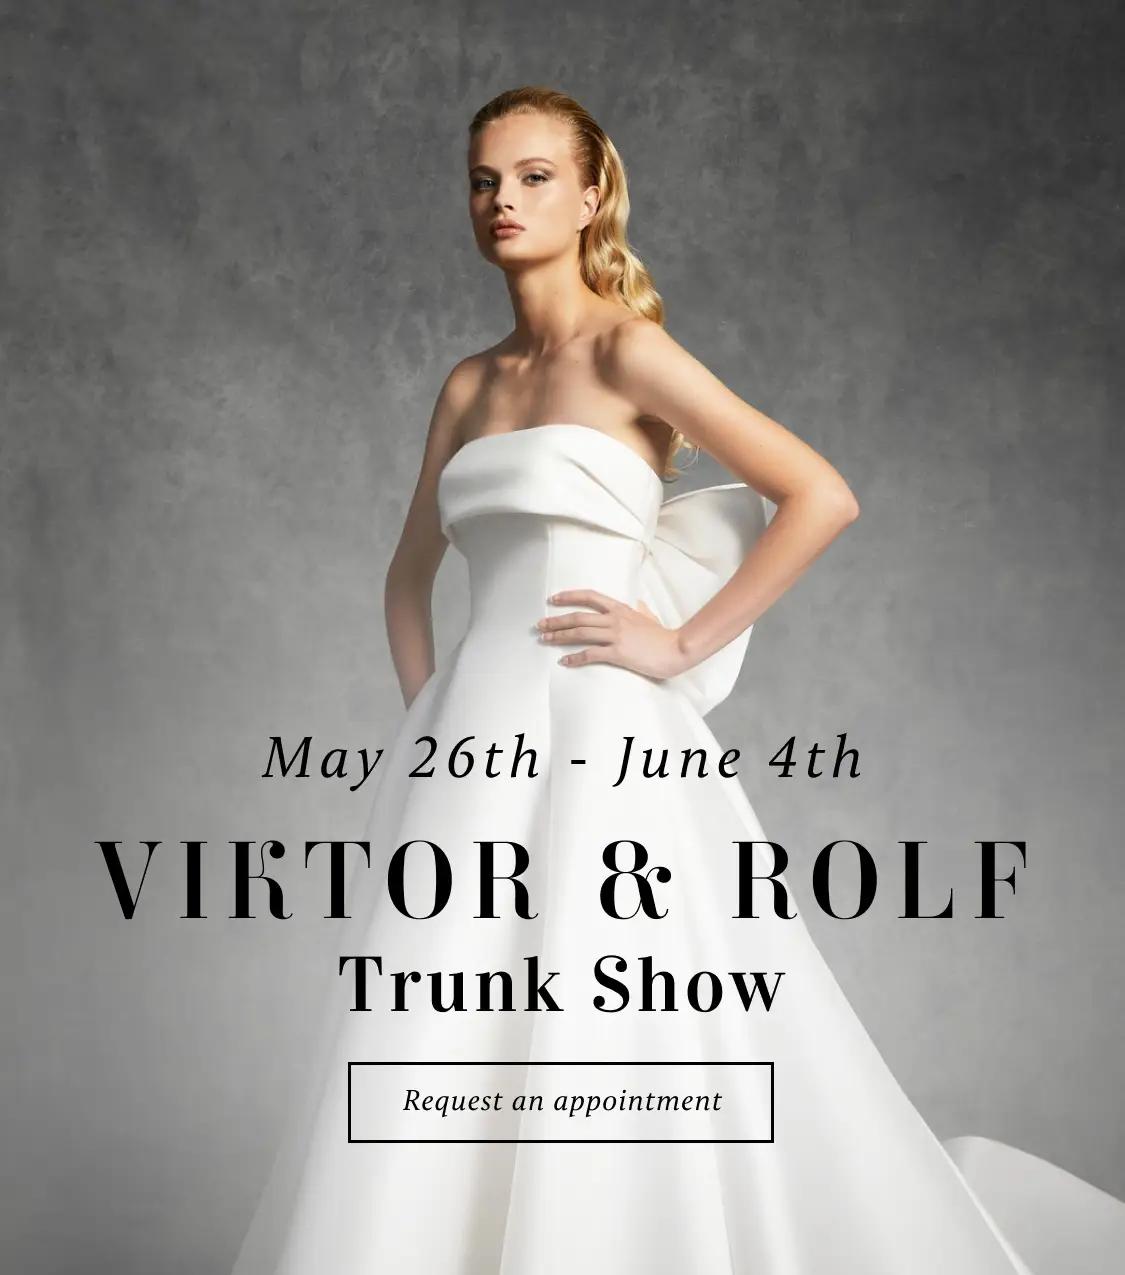 Viktor & Rolf Trunk Show _ May 26-June 4_Book appointment